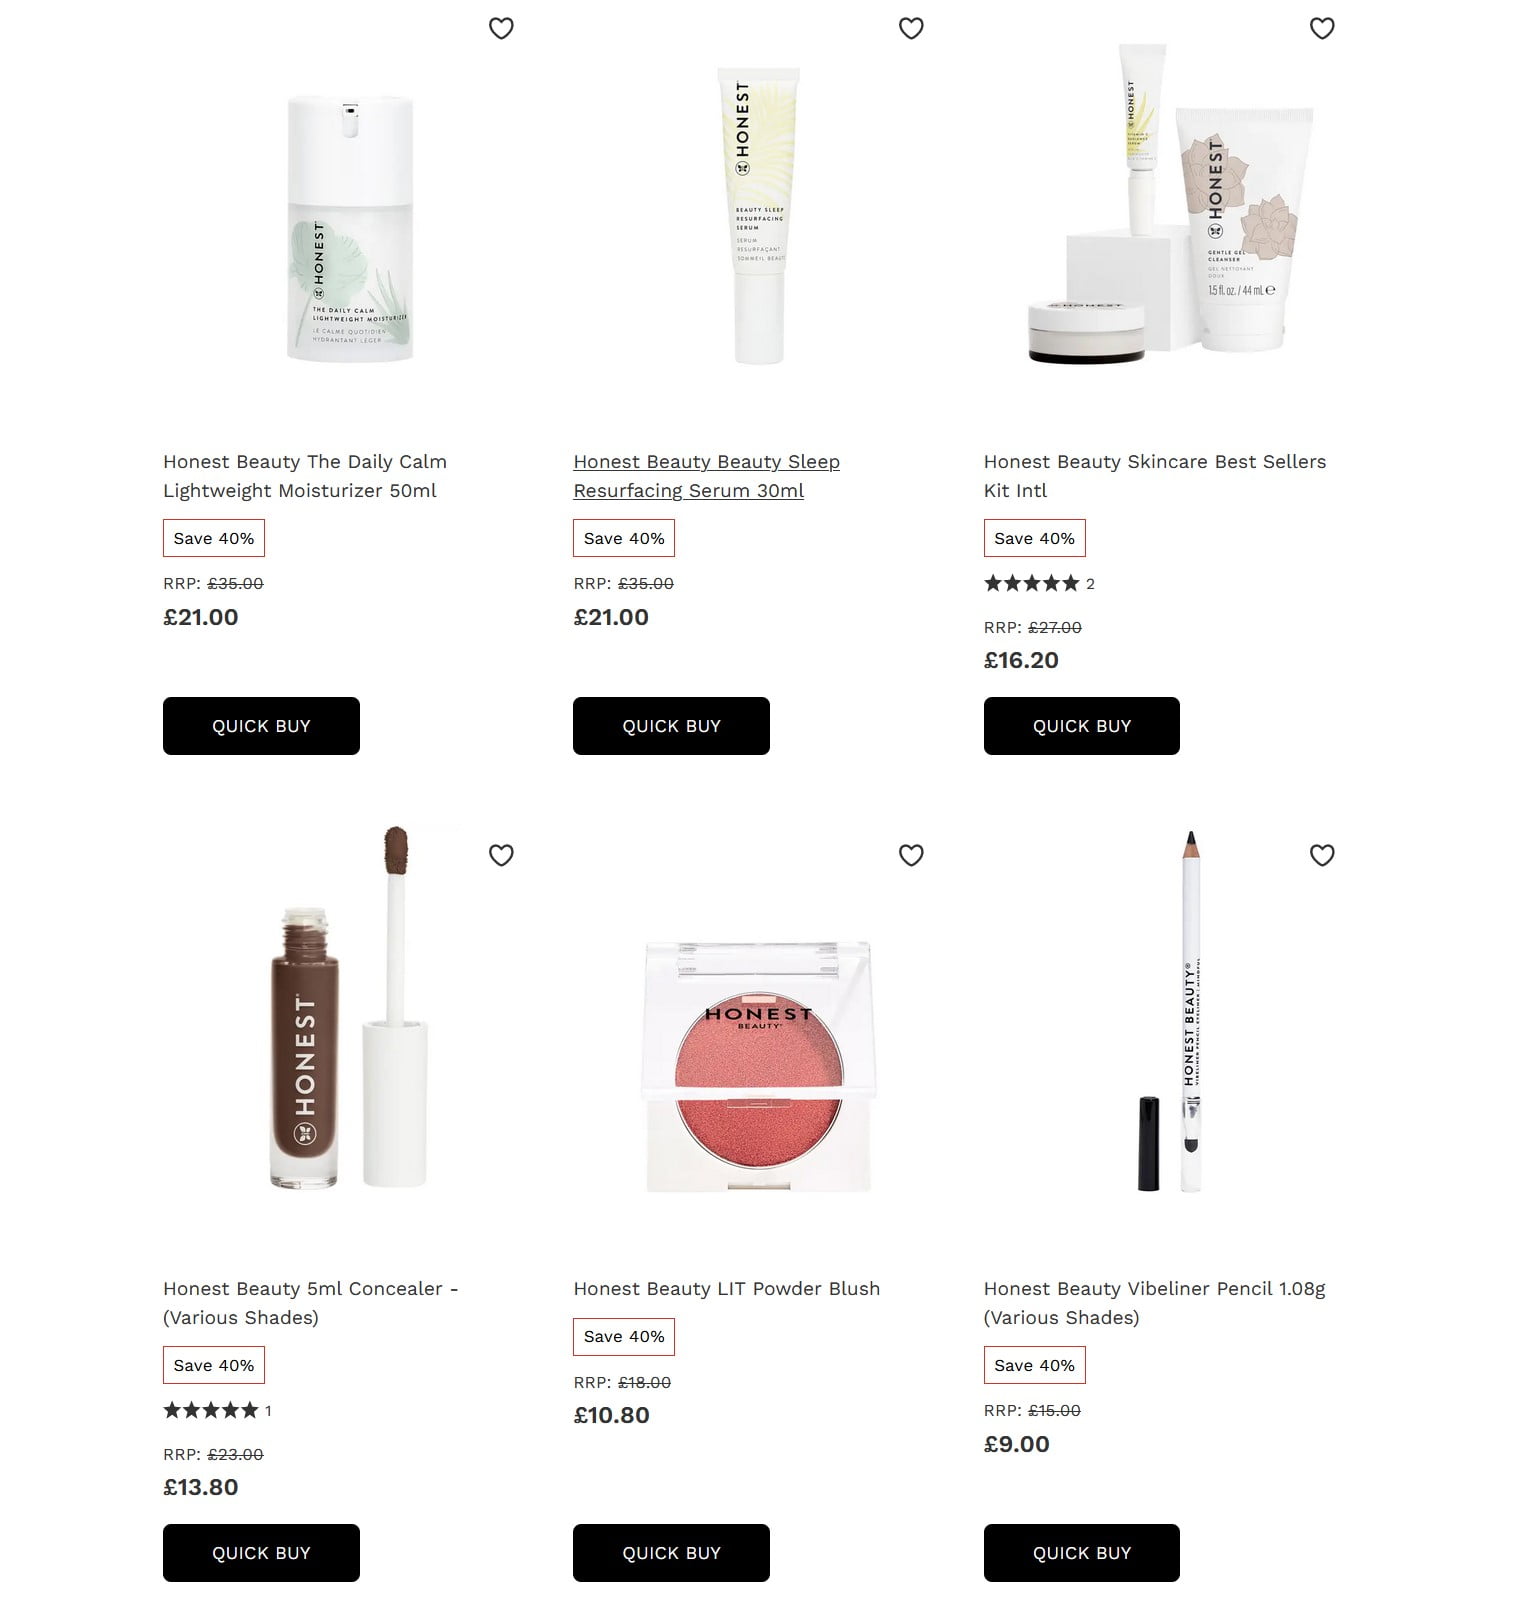 Up to 40% off Honest Beauty at Lookfantastic